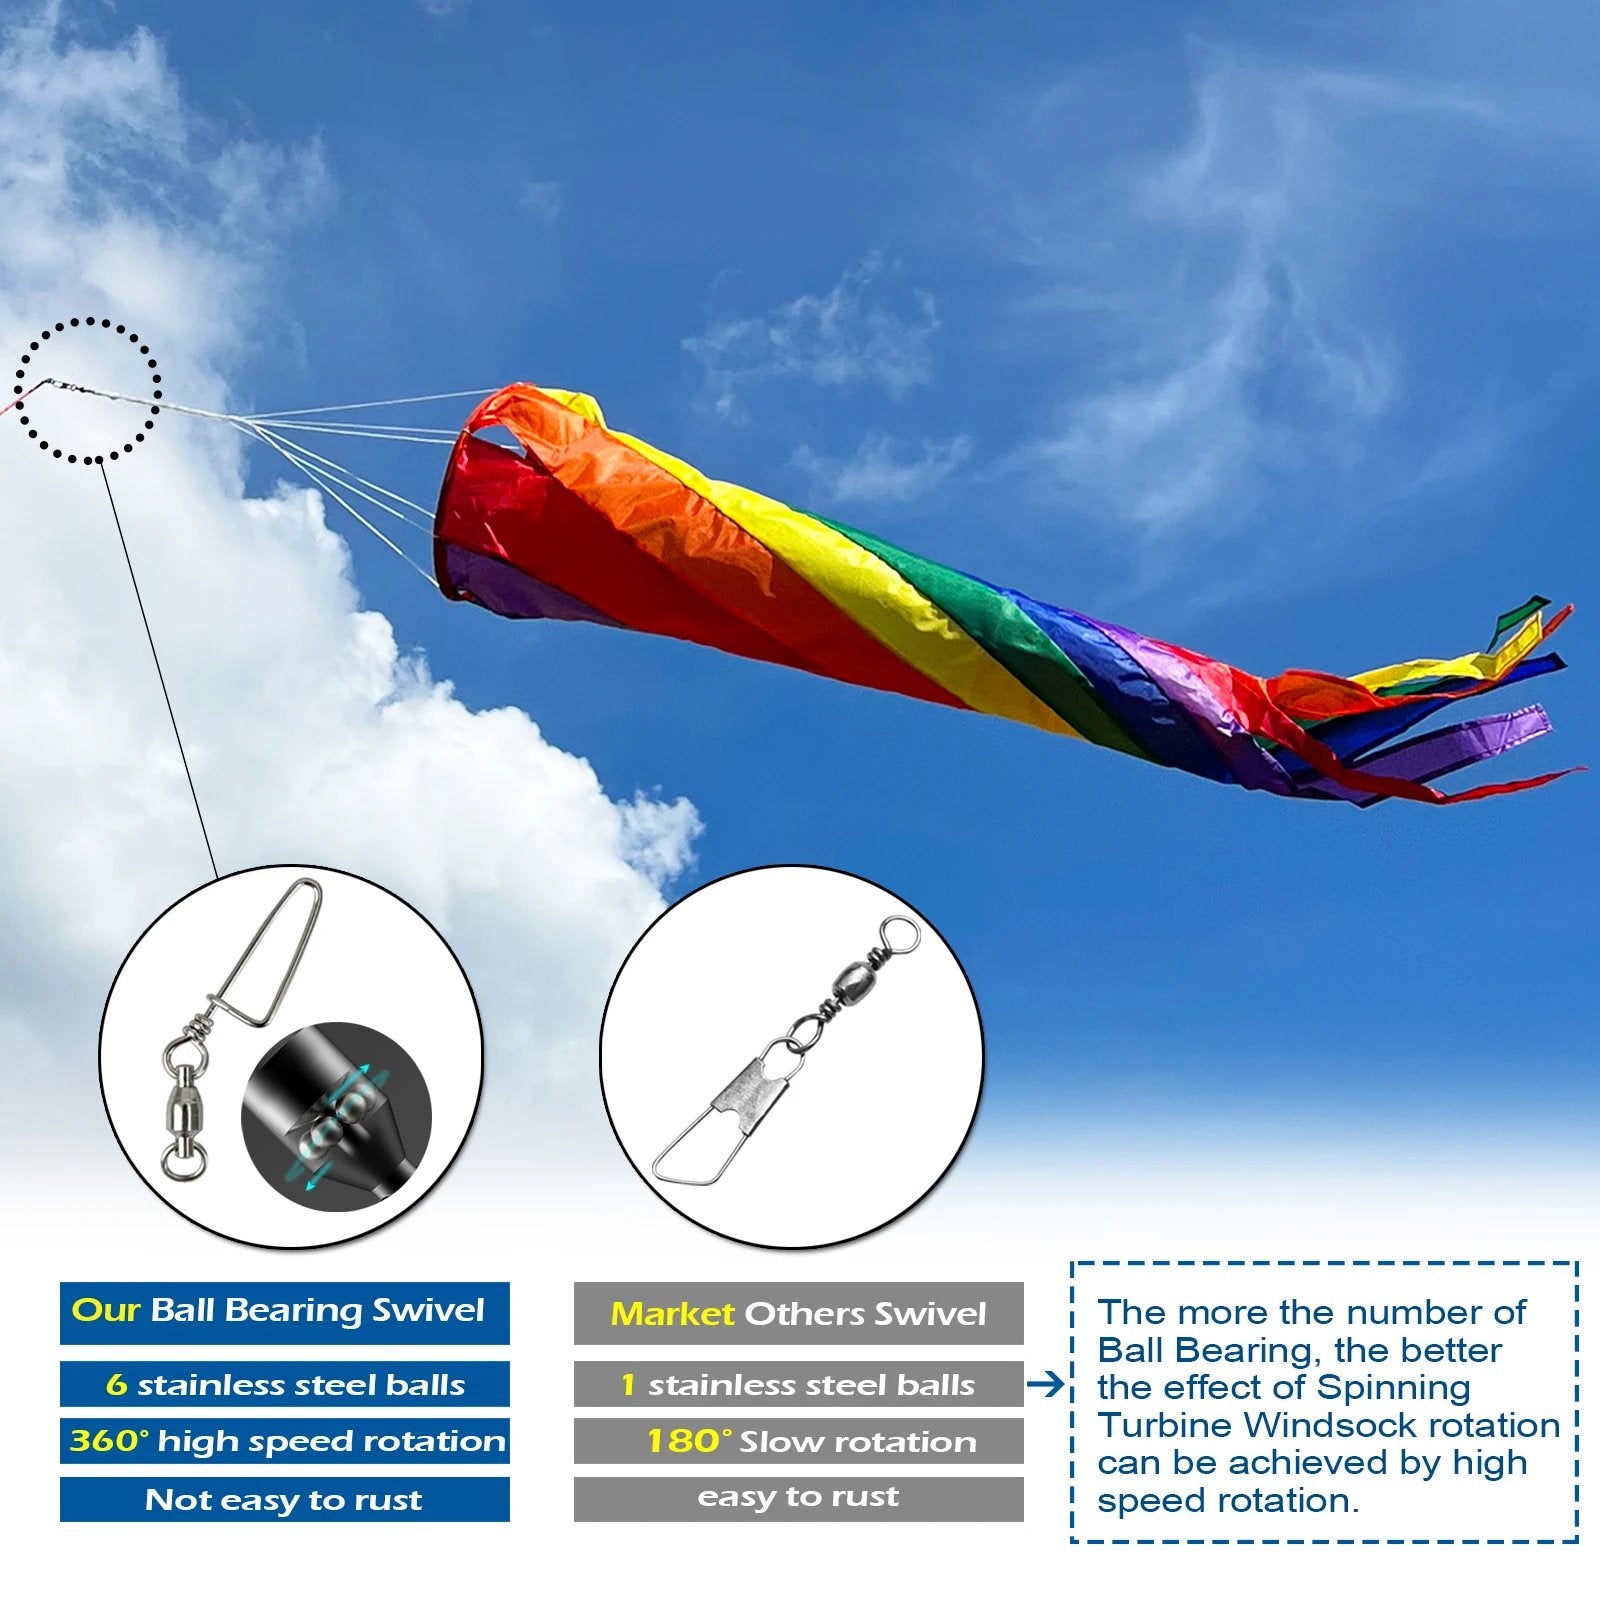 9KM 90cm Rainbow Spinning Turbine Windsock with Ball Bearing Swivels for Flag Poles Kite Tail Windsock Pole Outdoor